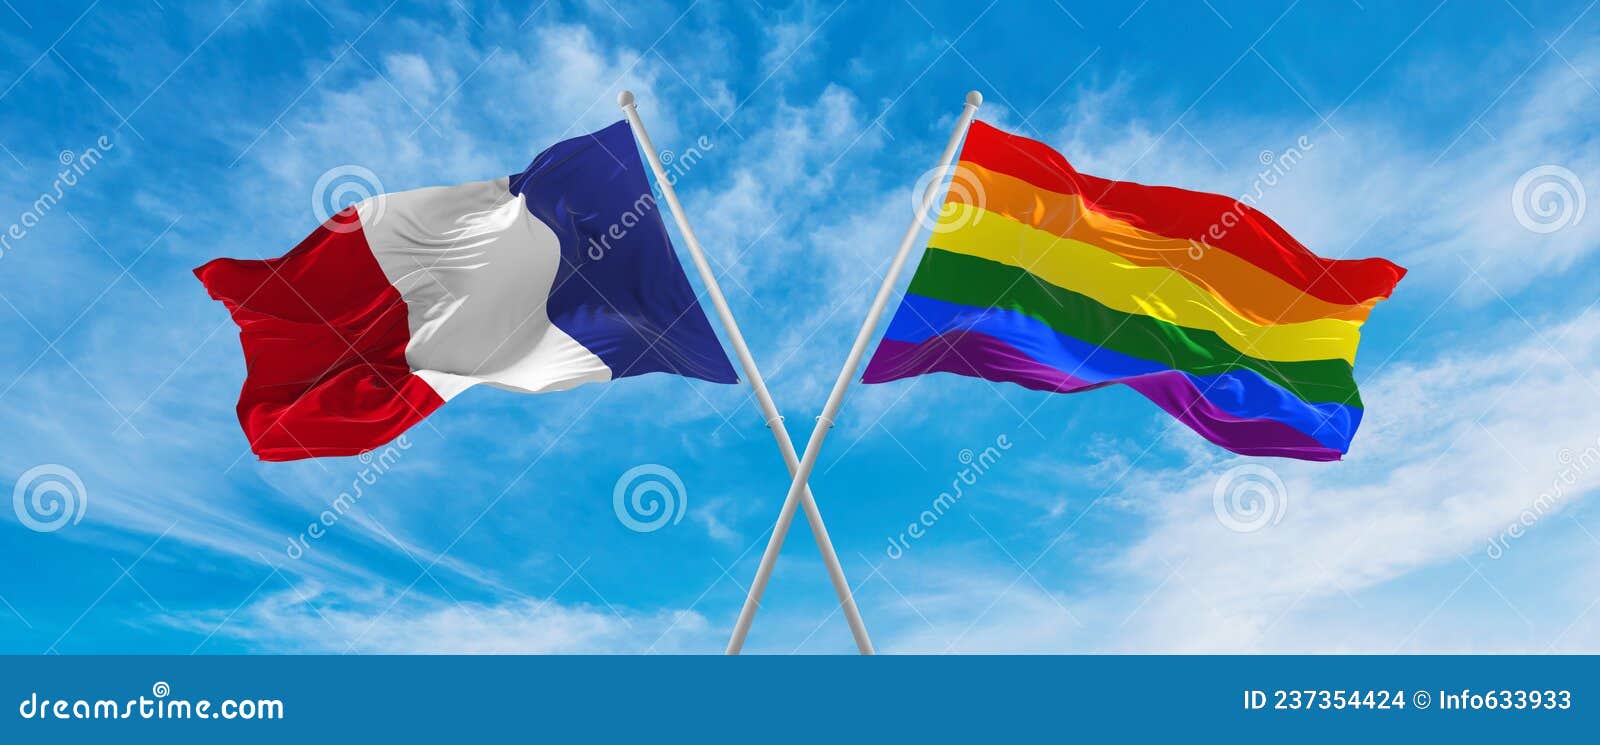 Crossed National Flags of France and LGBT Pride Flag Waving in the Wind ...